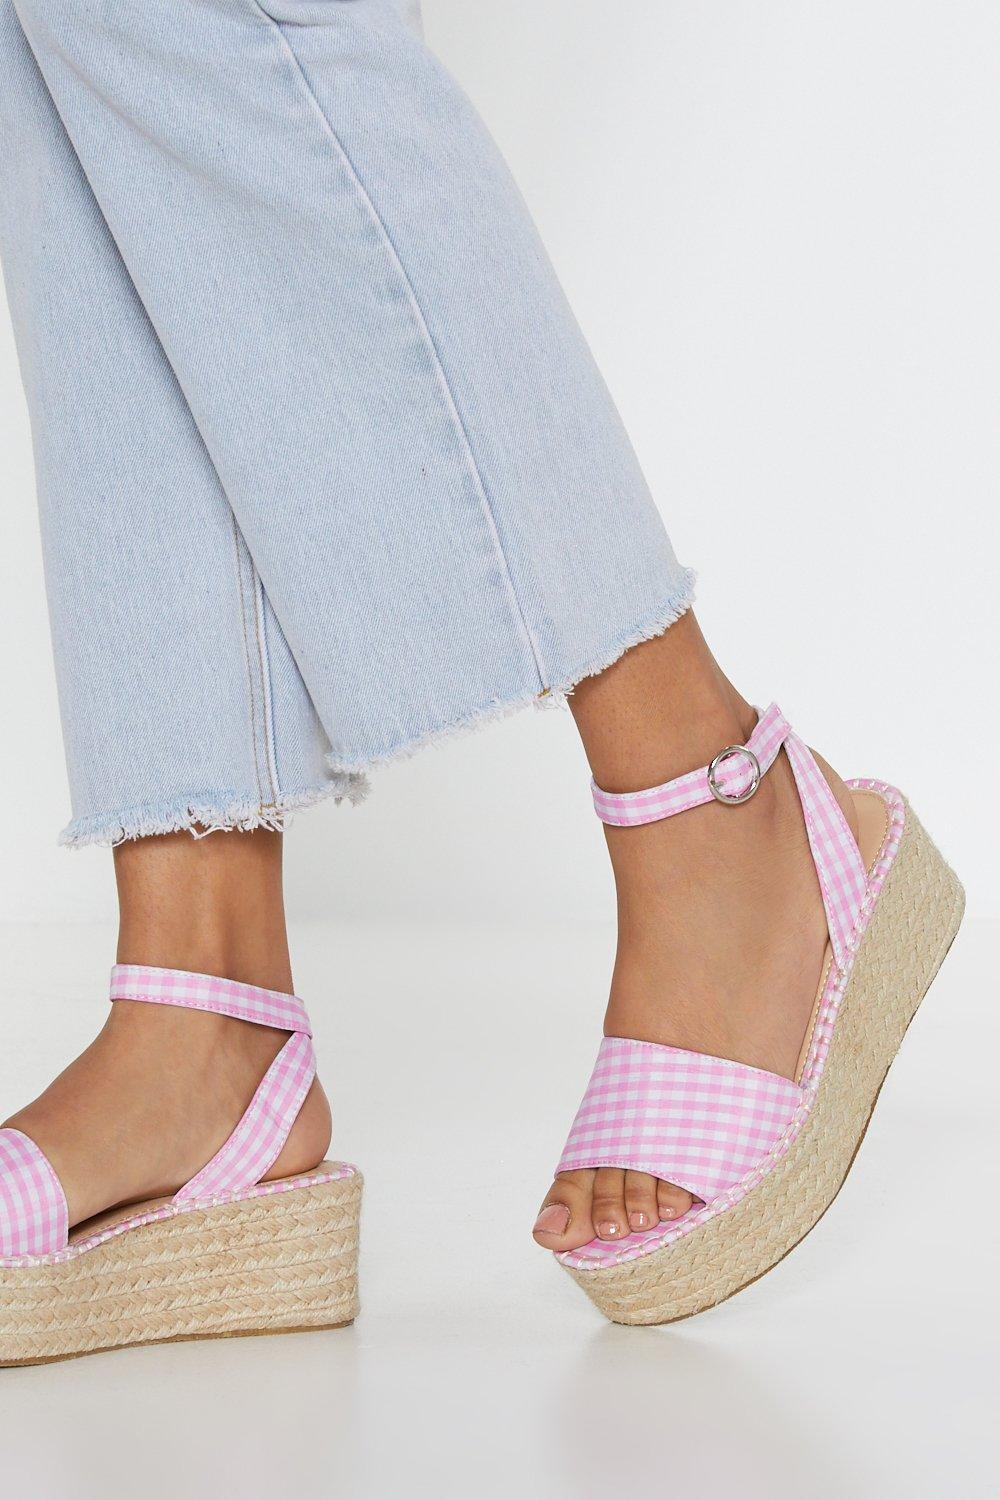 cute flat shoes with arch support